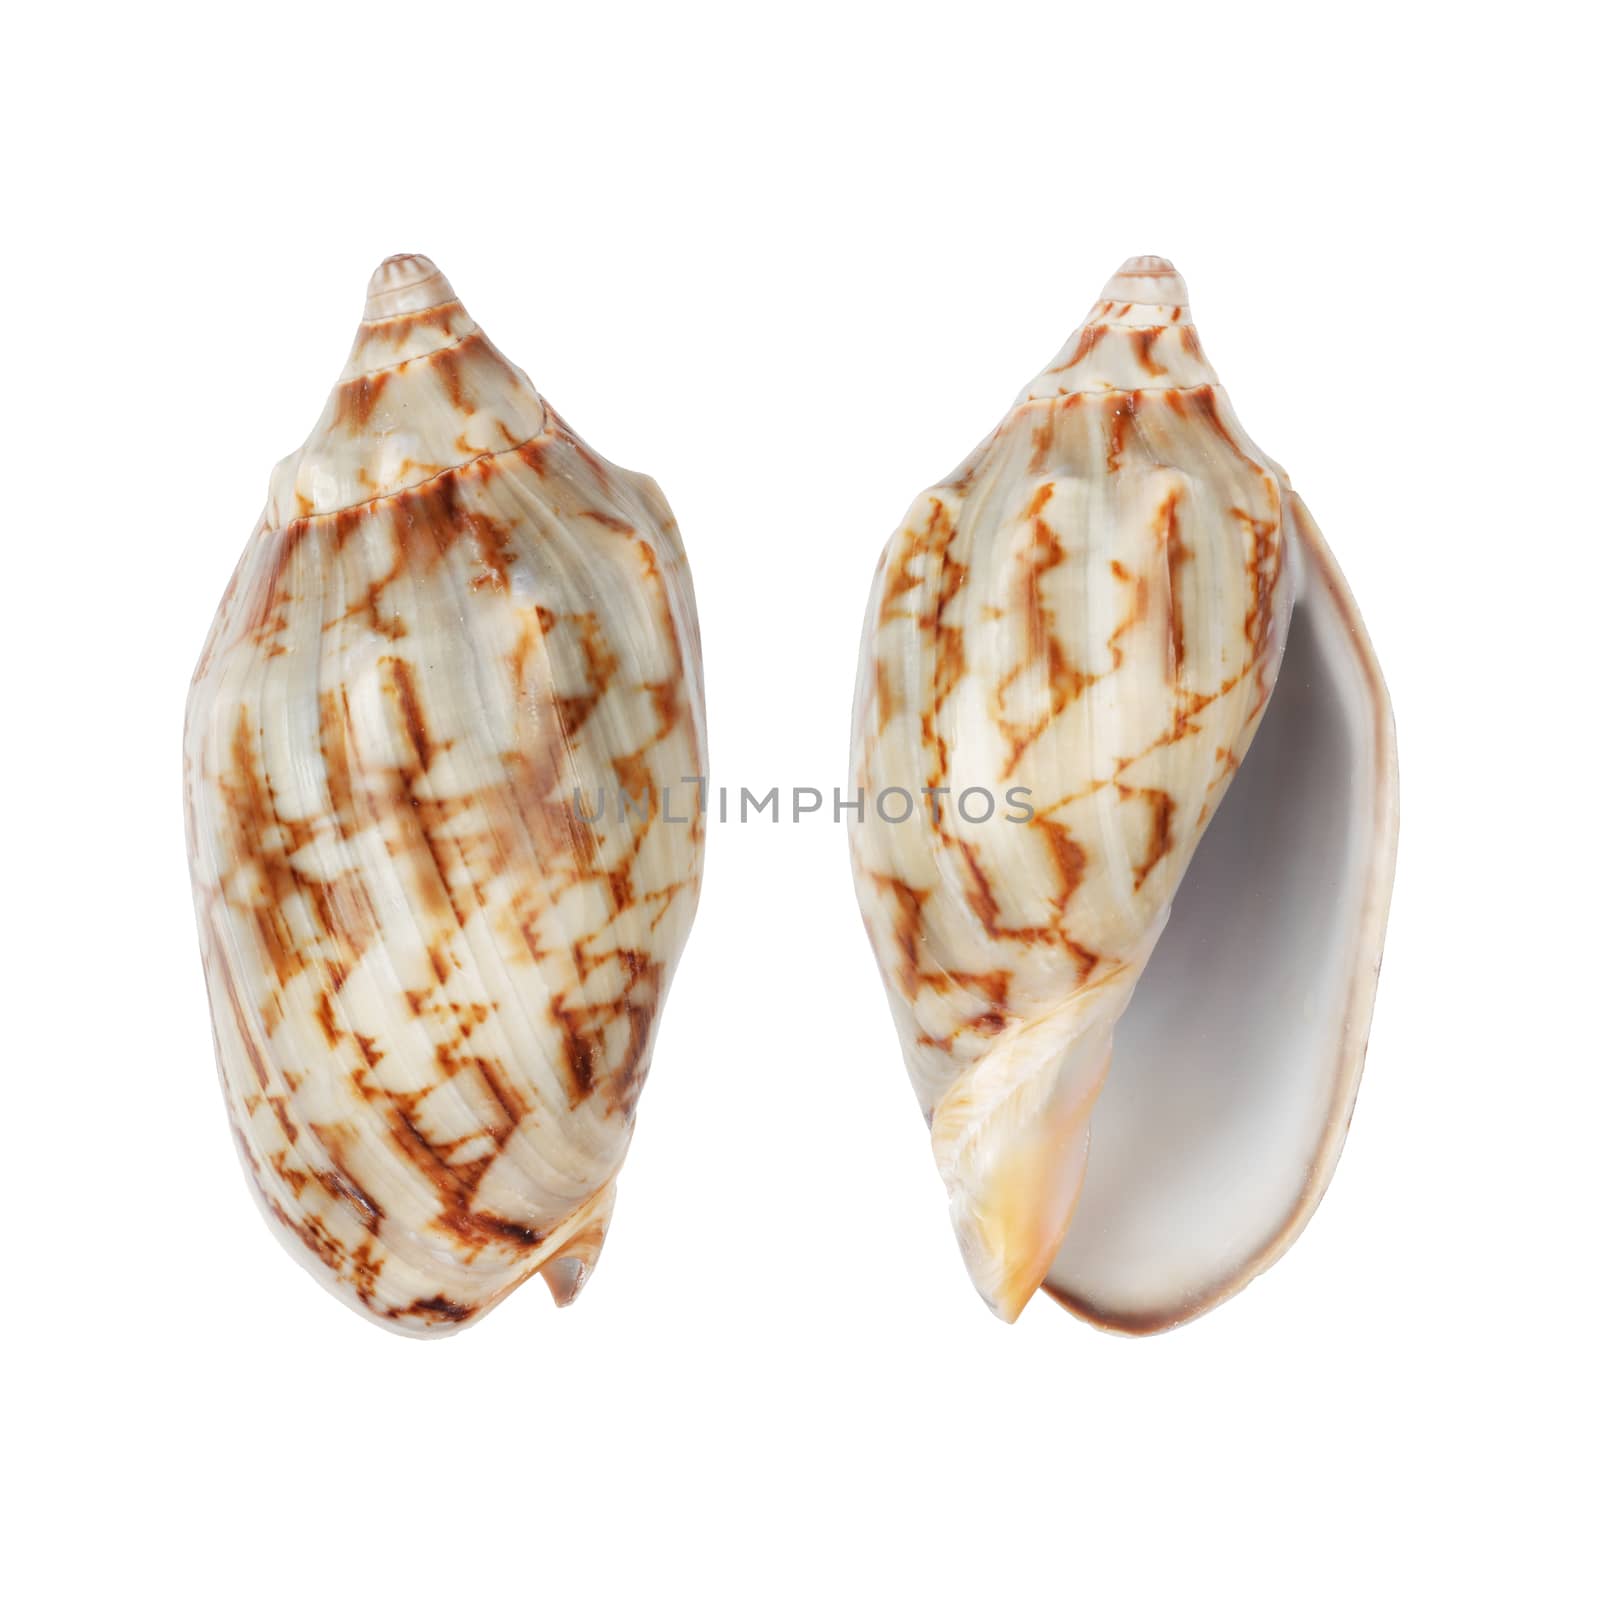 Two Whelk shells isolated on white with clipping path